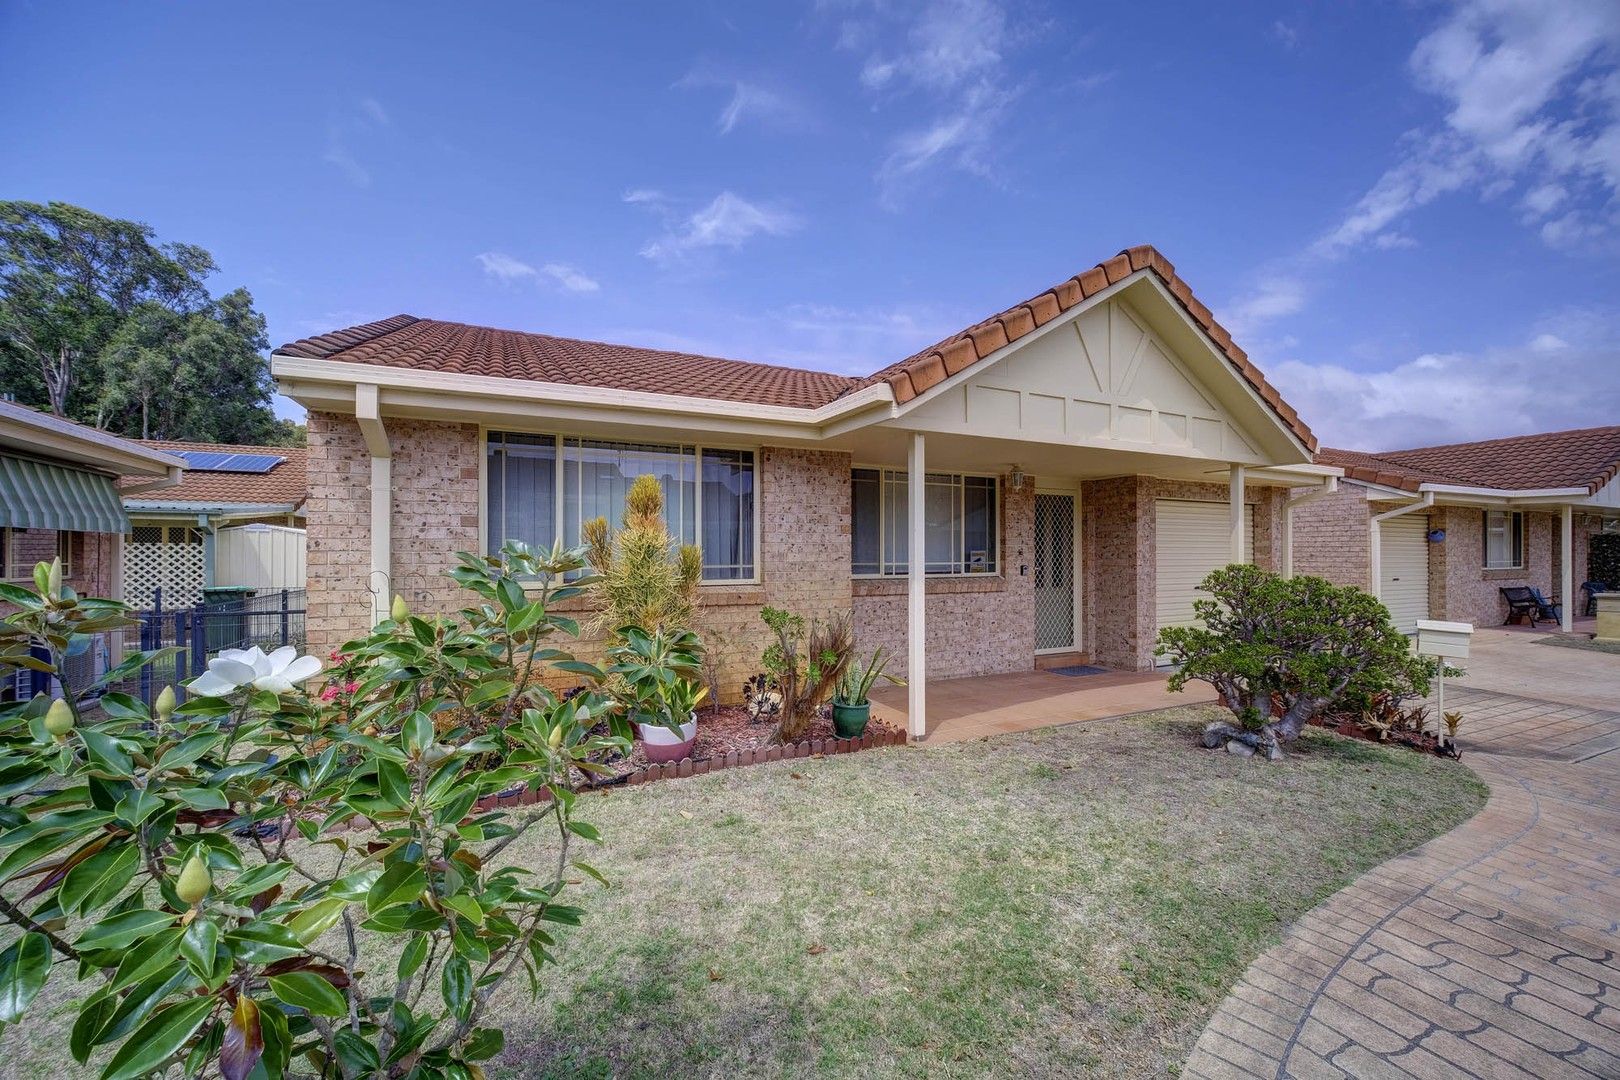 12/32 Parkway Drive, Tuncurry NSW 2428, Image 0